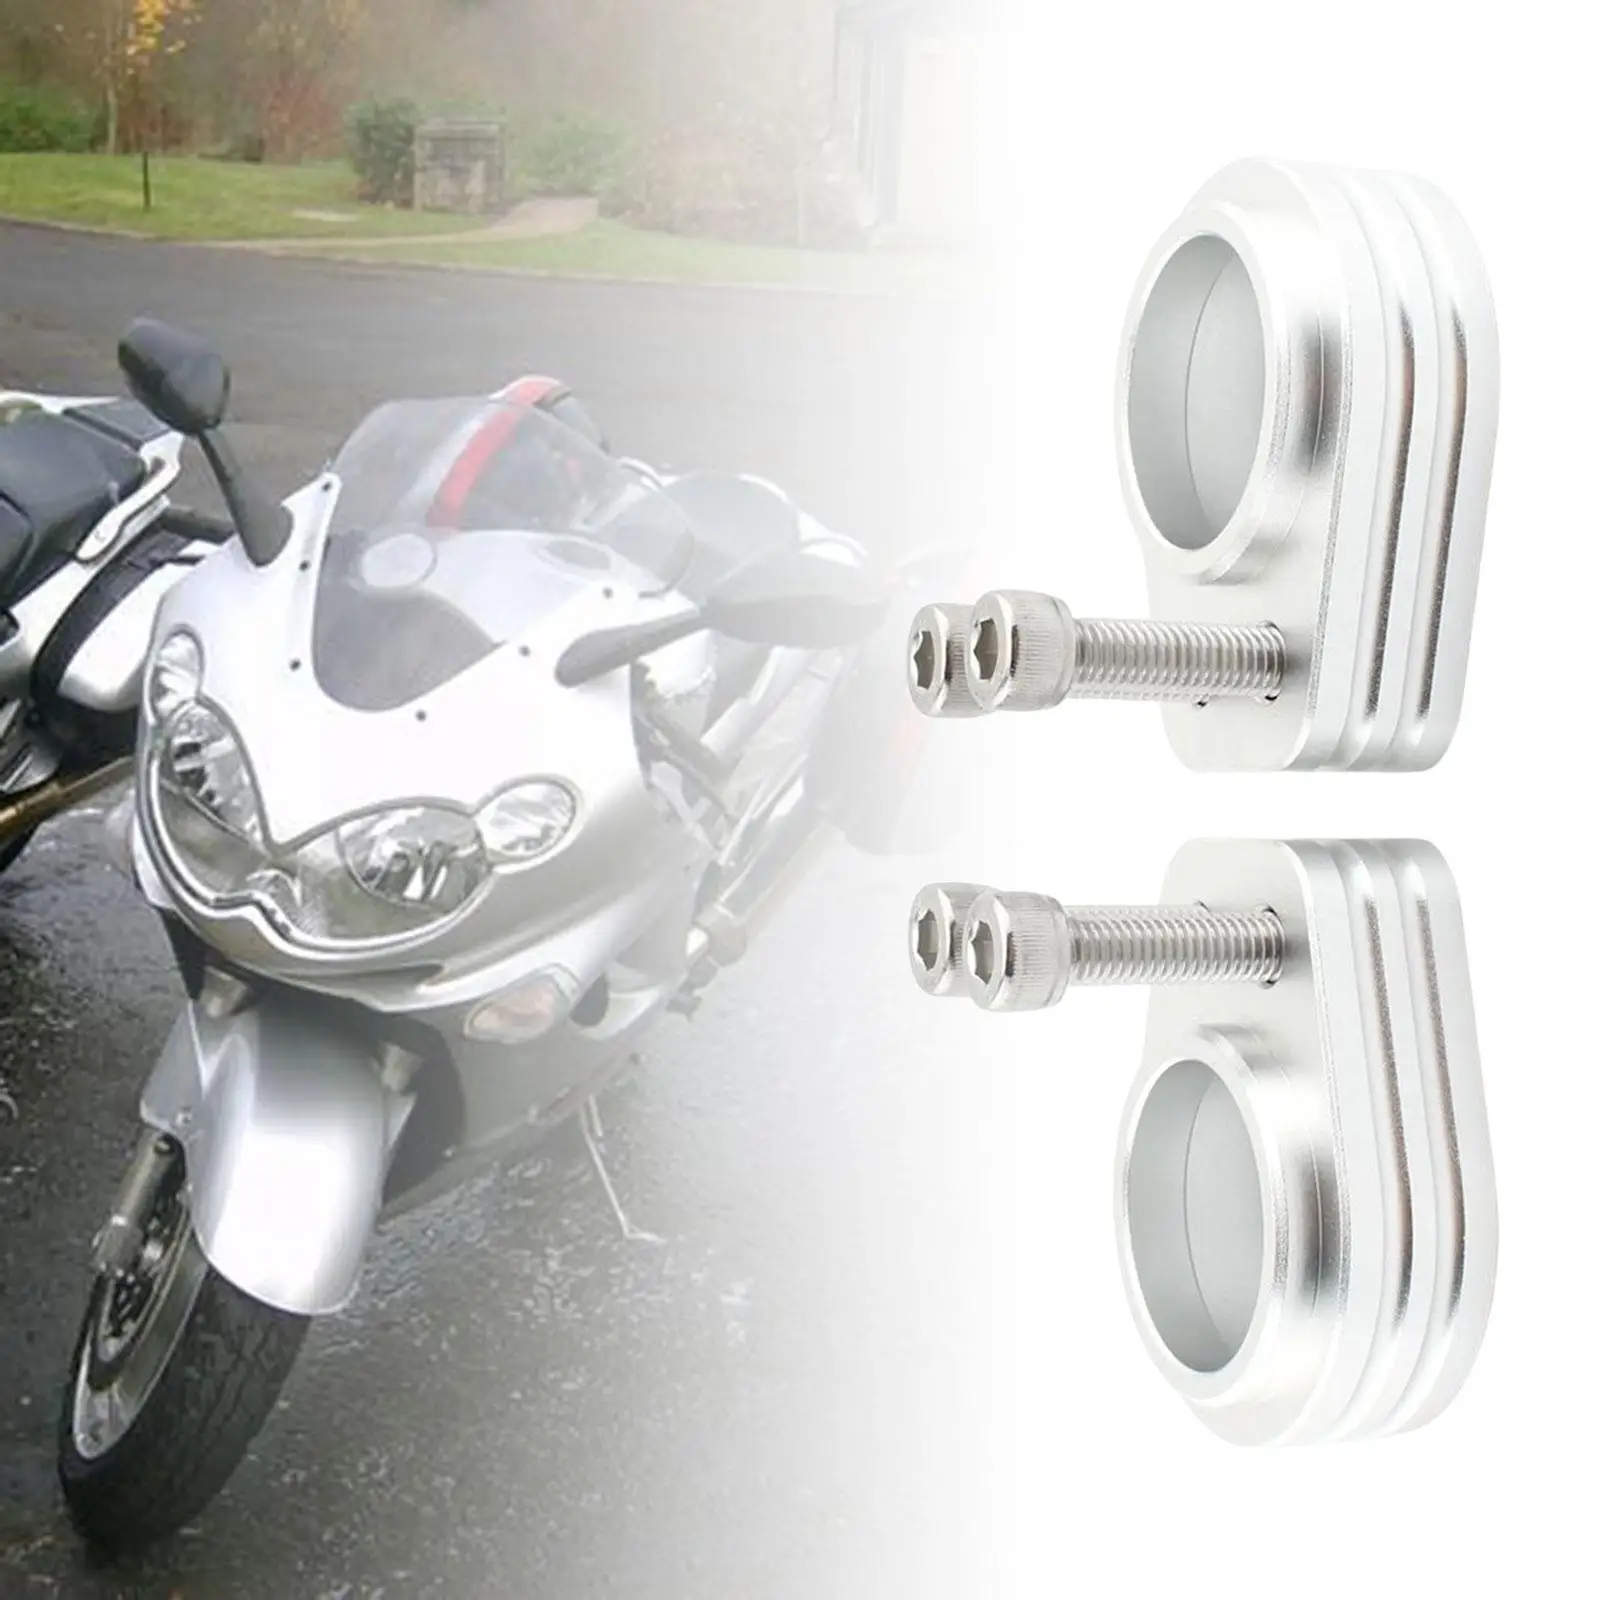 Motorcycle Mount Riser Clamp 0.8inch Durable for Kawasaki Zzr1200